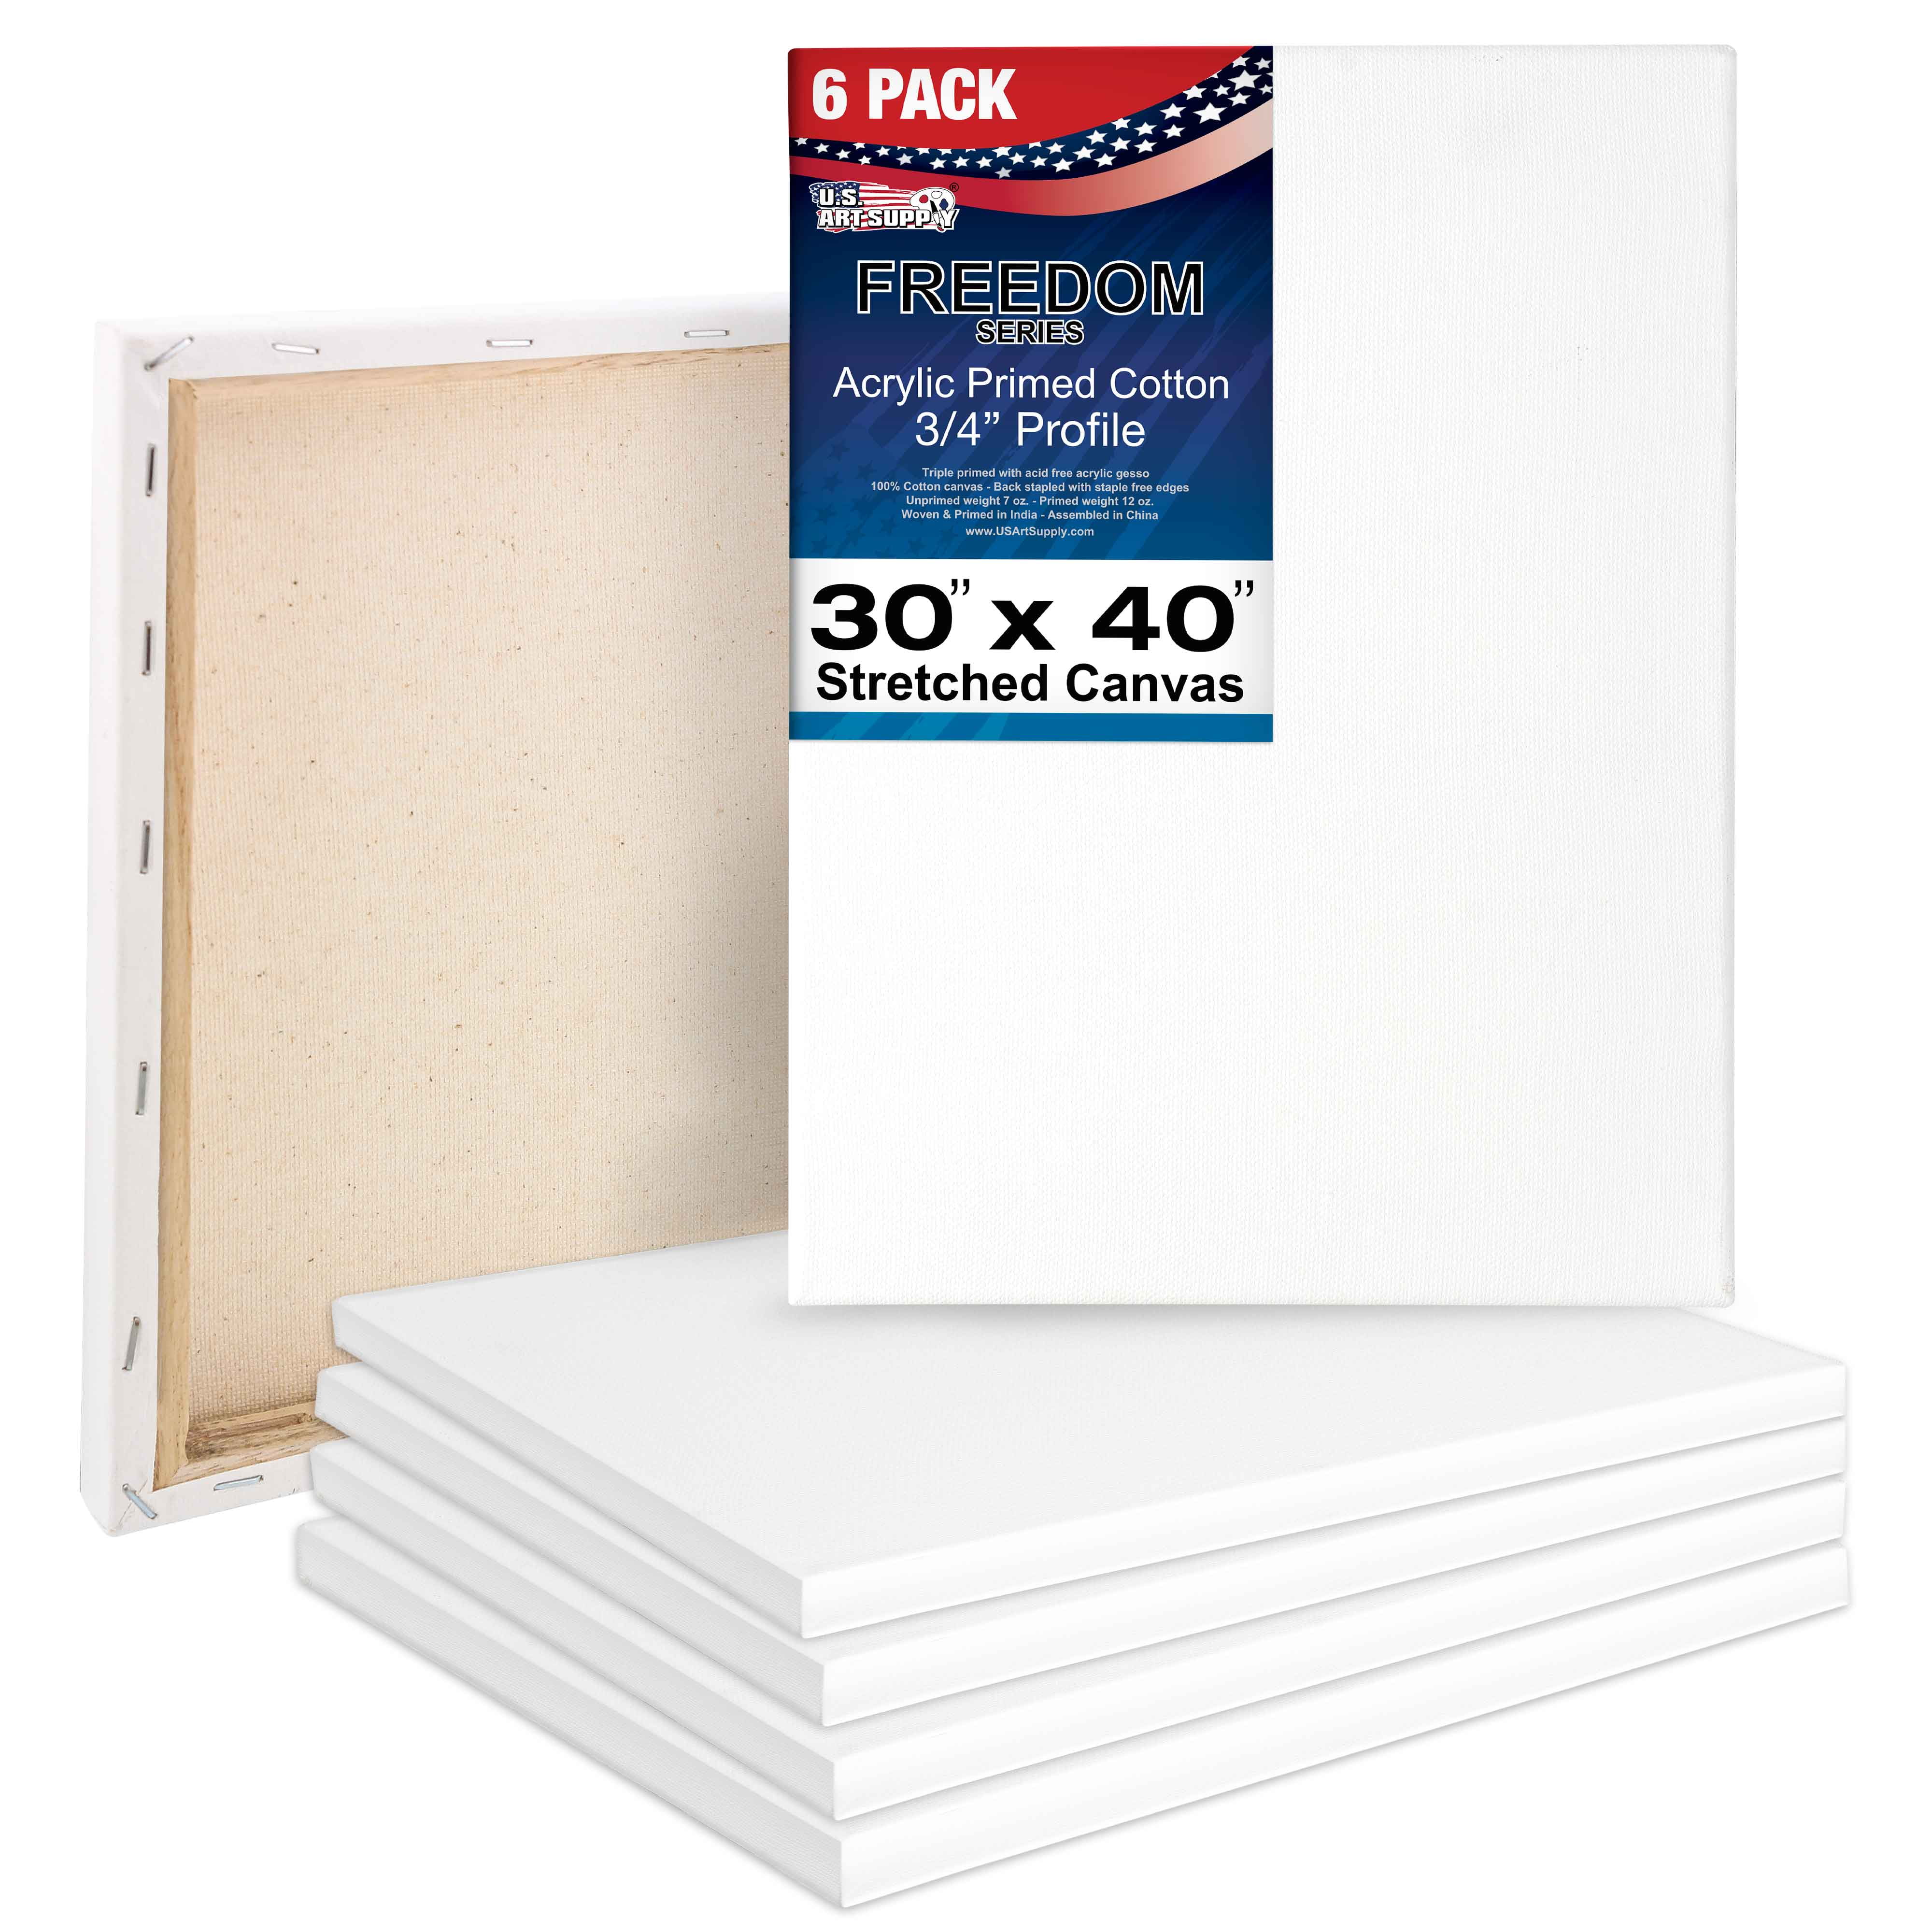  Academy Art Supply Stretched Canvases 20 x 30 inch - 100%  Cotton Artist Blank Canvas for Painting, Pre-gessoed, Primed, Acid-Free  Canvases, Perfect for Acrylic and Oil Painting, Pack of 6